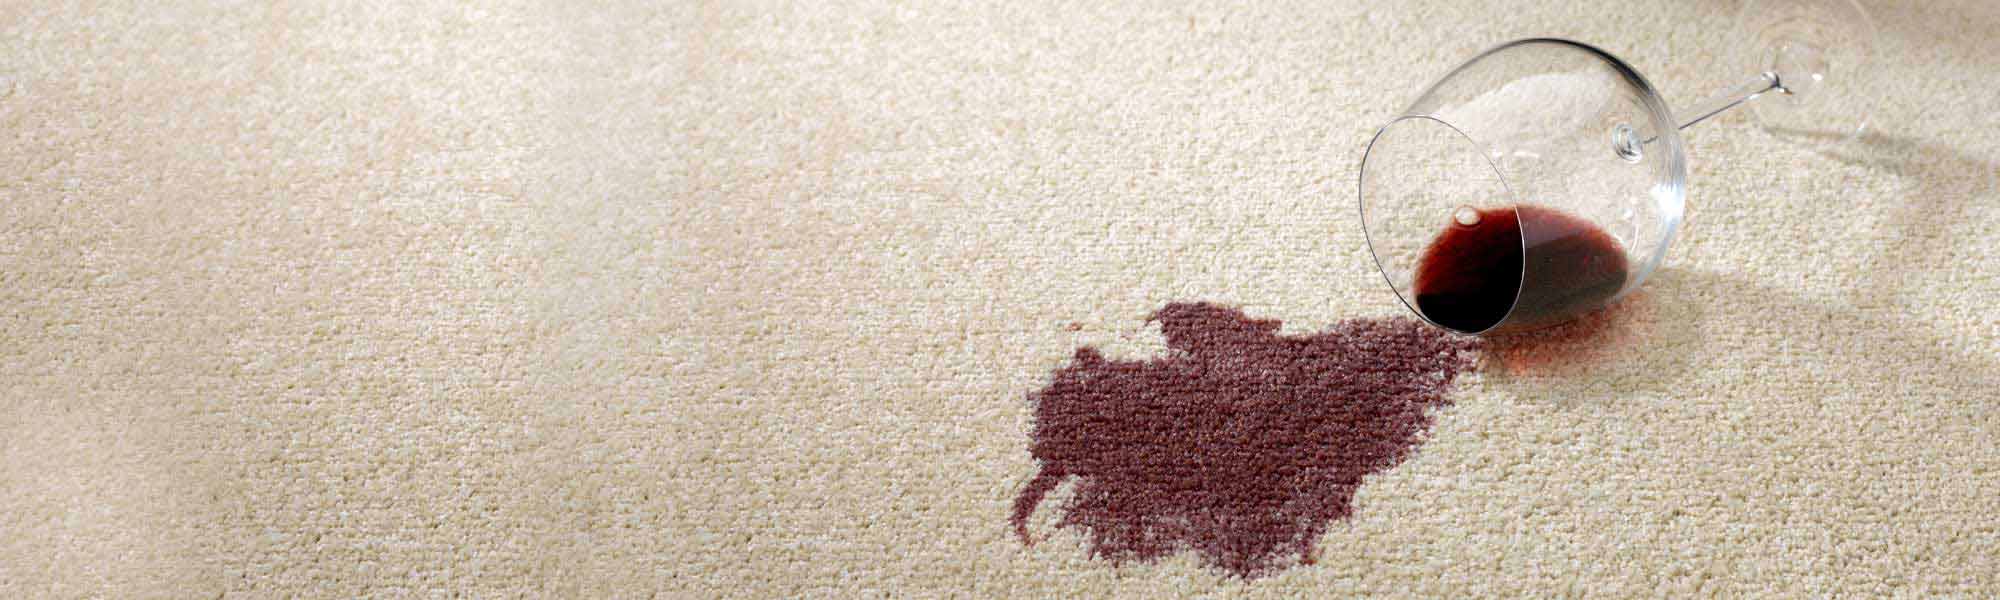 Professional Stain Removal In Mississauga by Green Leaf Chem-Dry